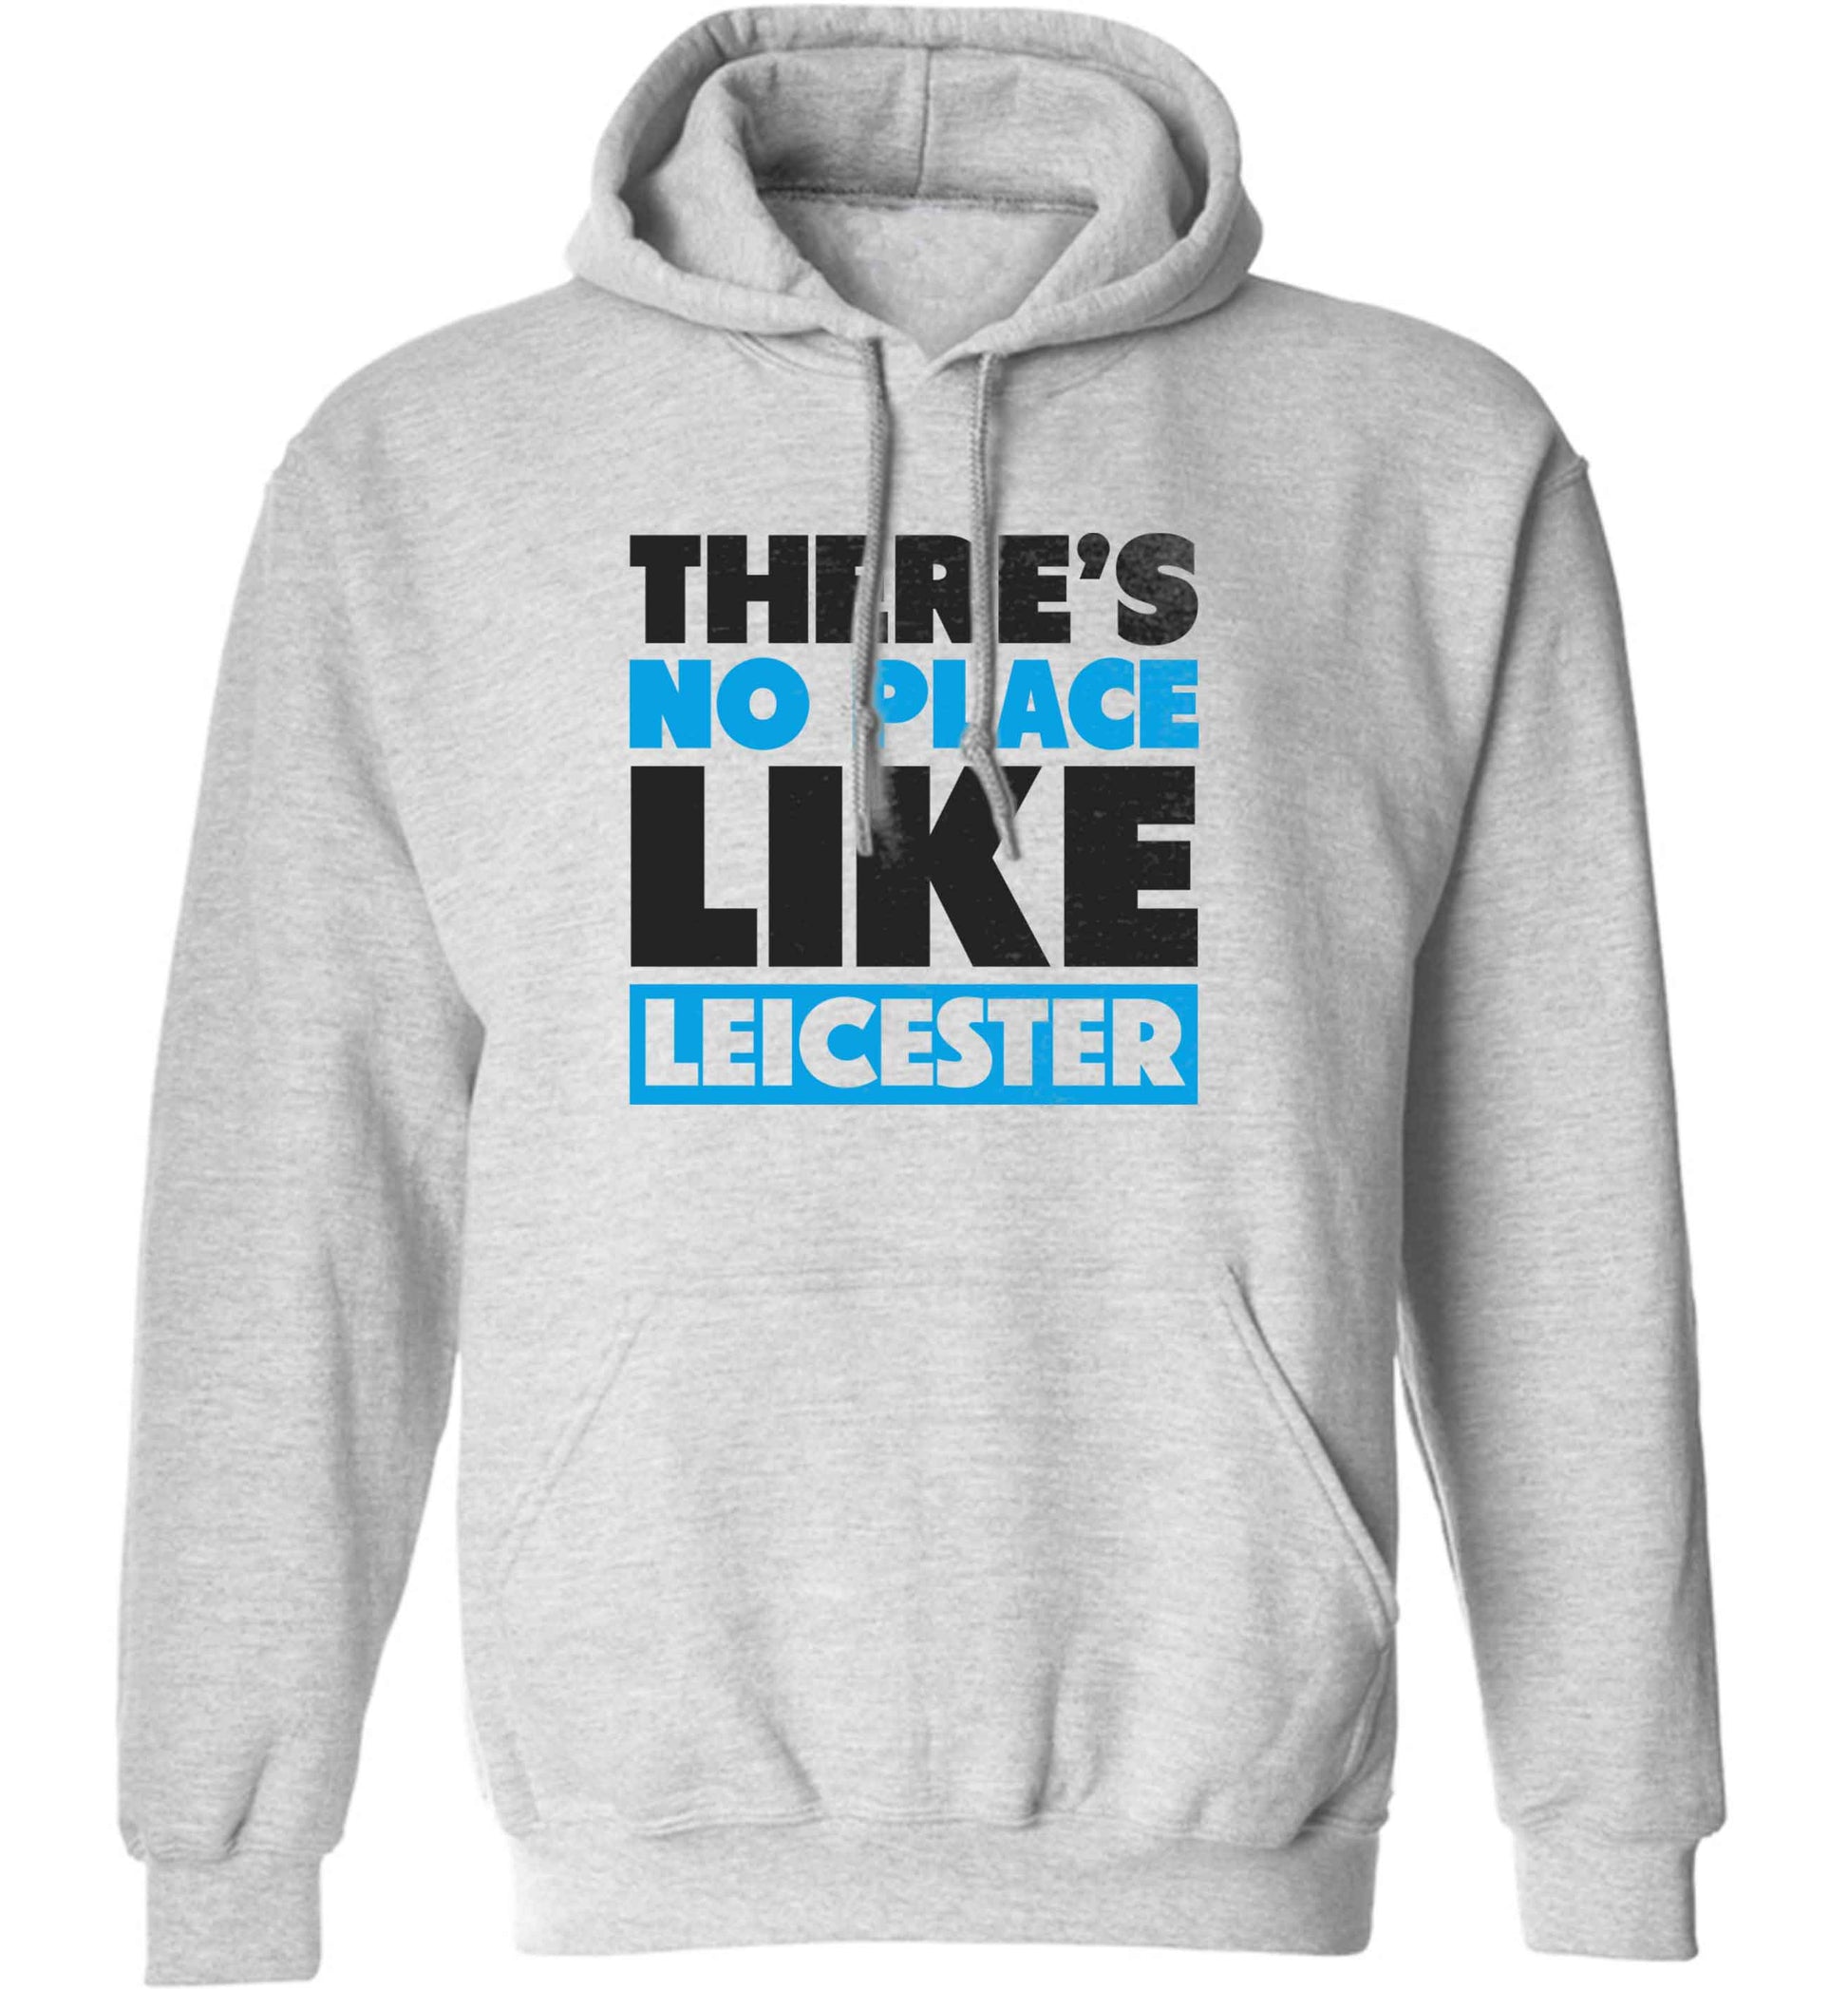 There's no place like Leicester adults unisex grey hoodie 2XL